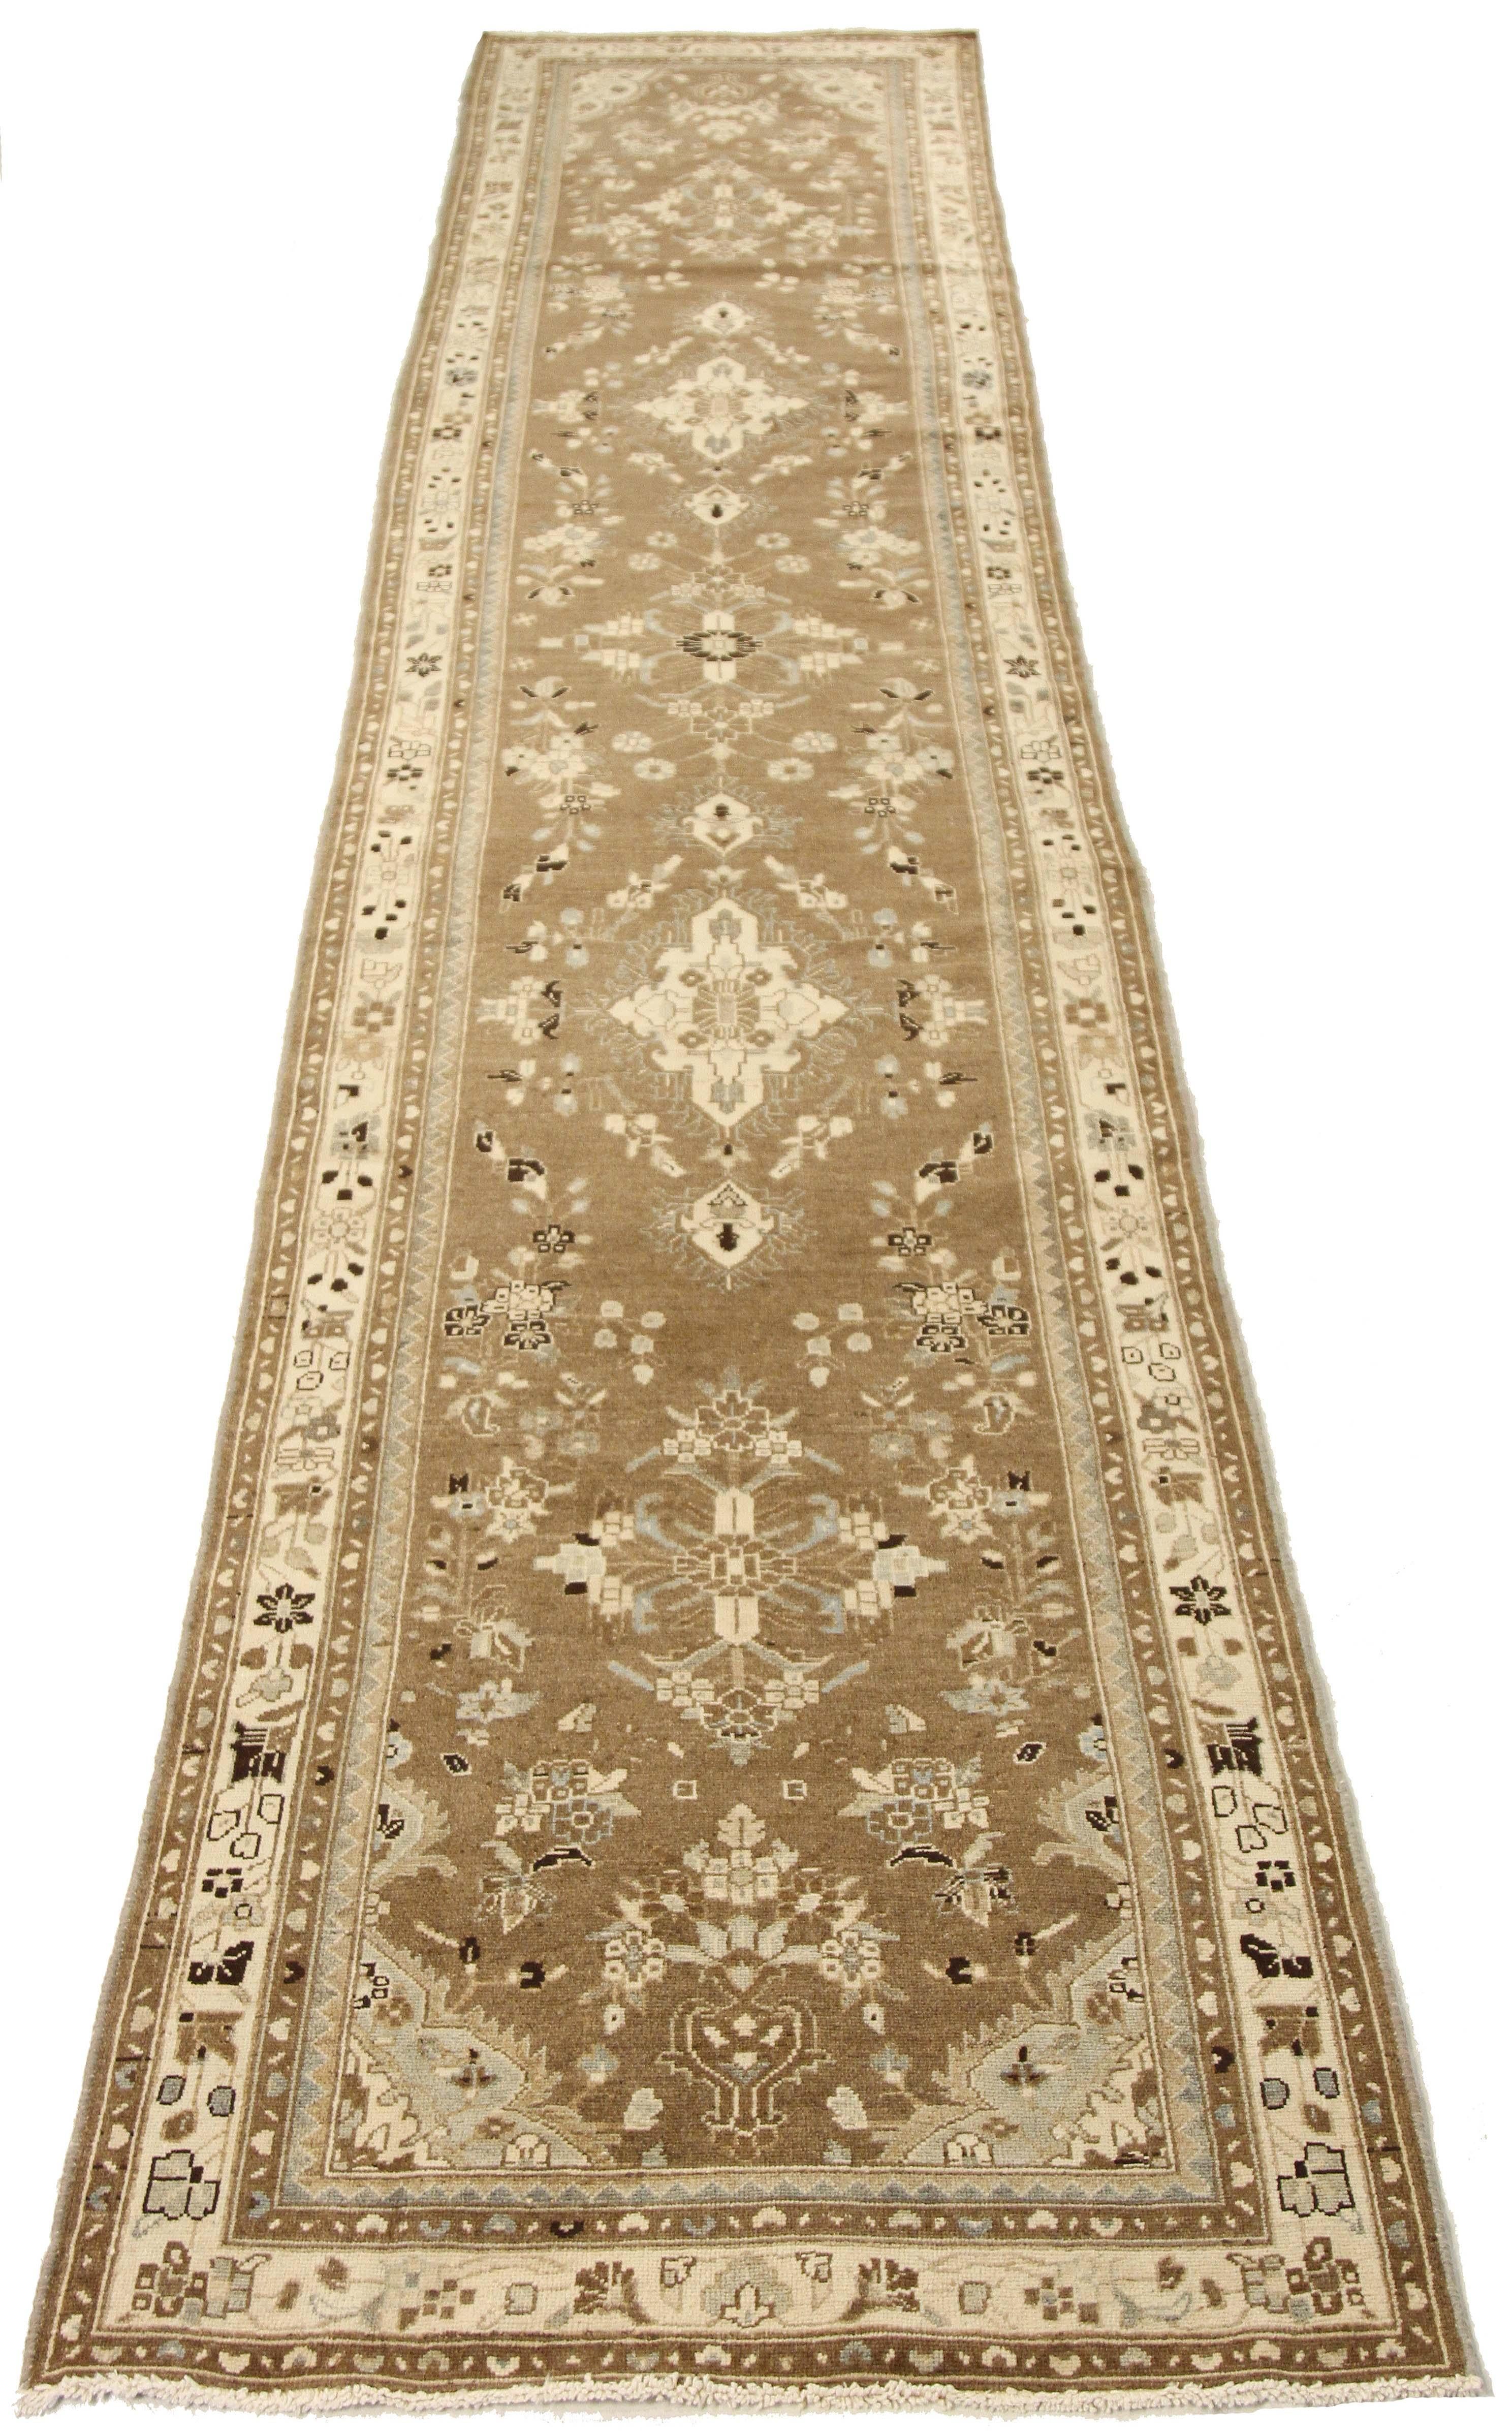 Antique Persian runner rug handwoven from the finest sheep’s wool and colored with all-natural vegetable dyes that are safe for humans and pets. It’s a traditional Malayer design featuring black and ivory floral patterns over a brown field. It’s a